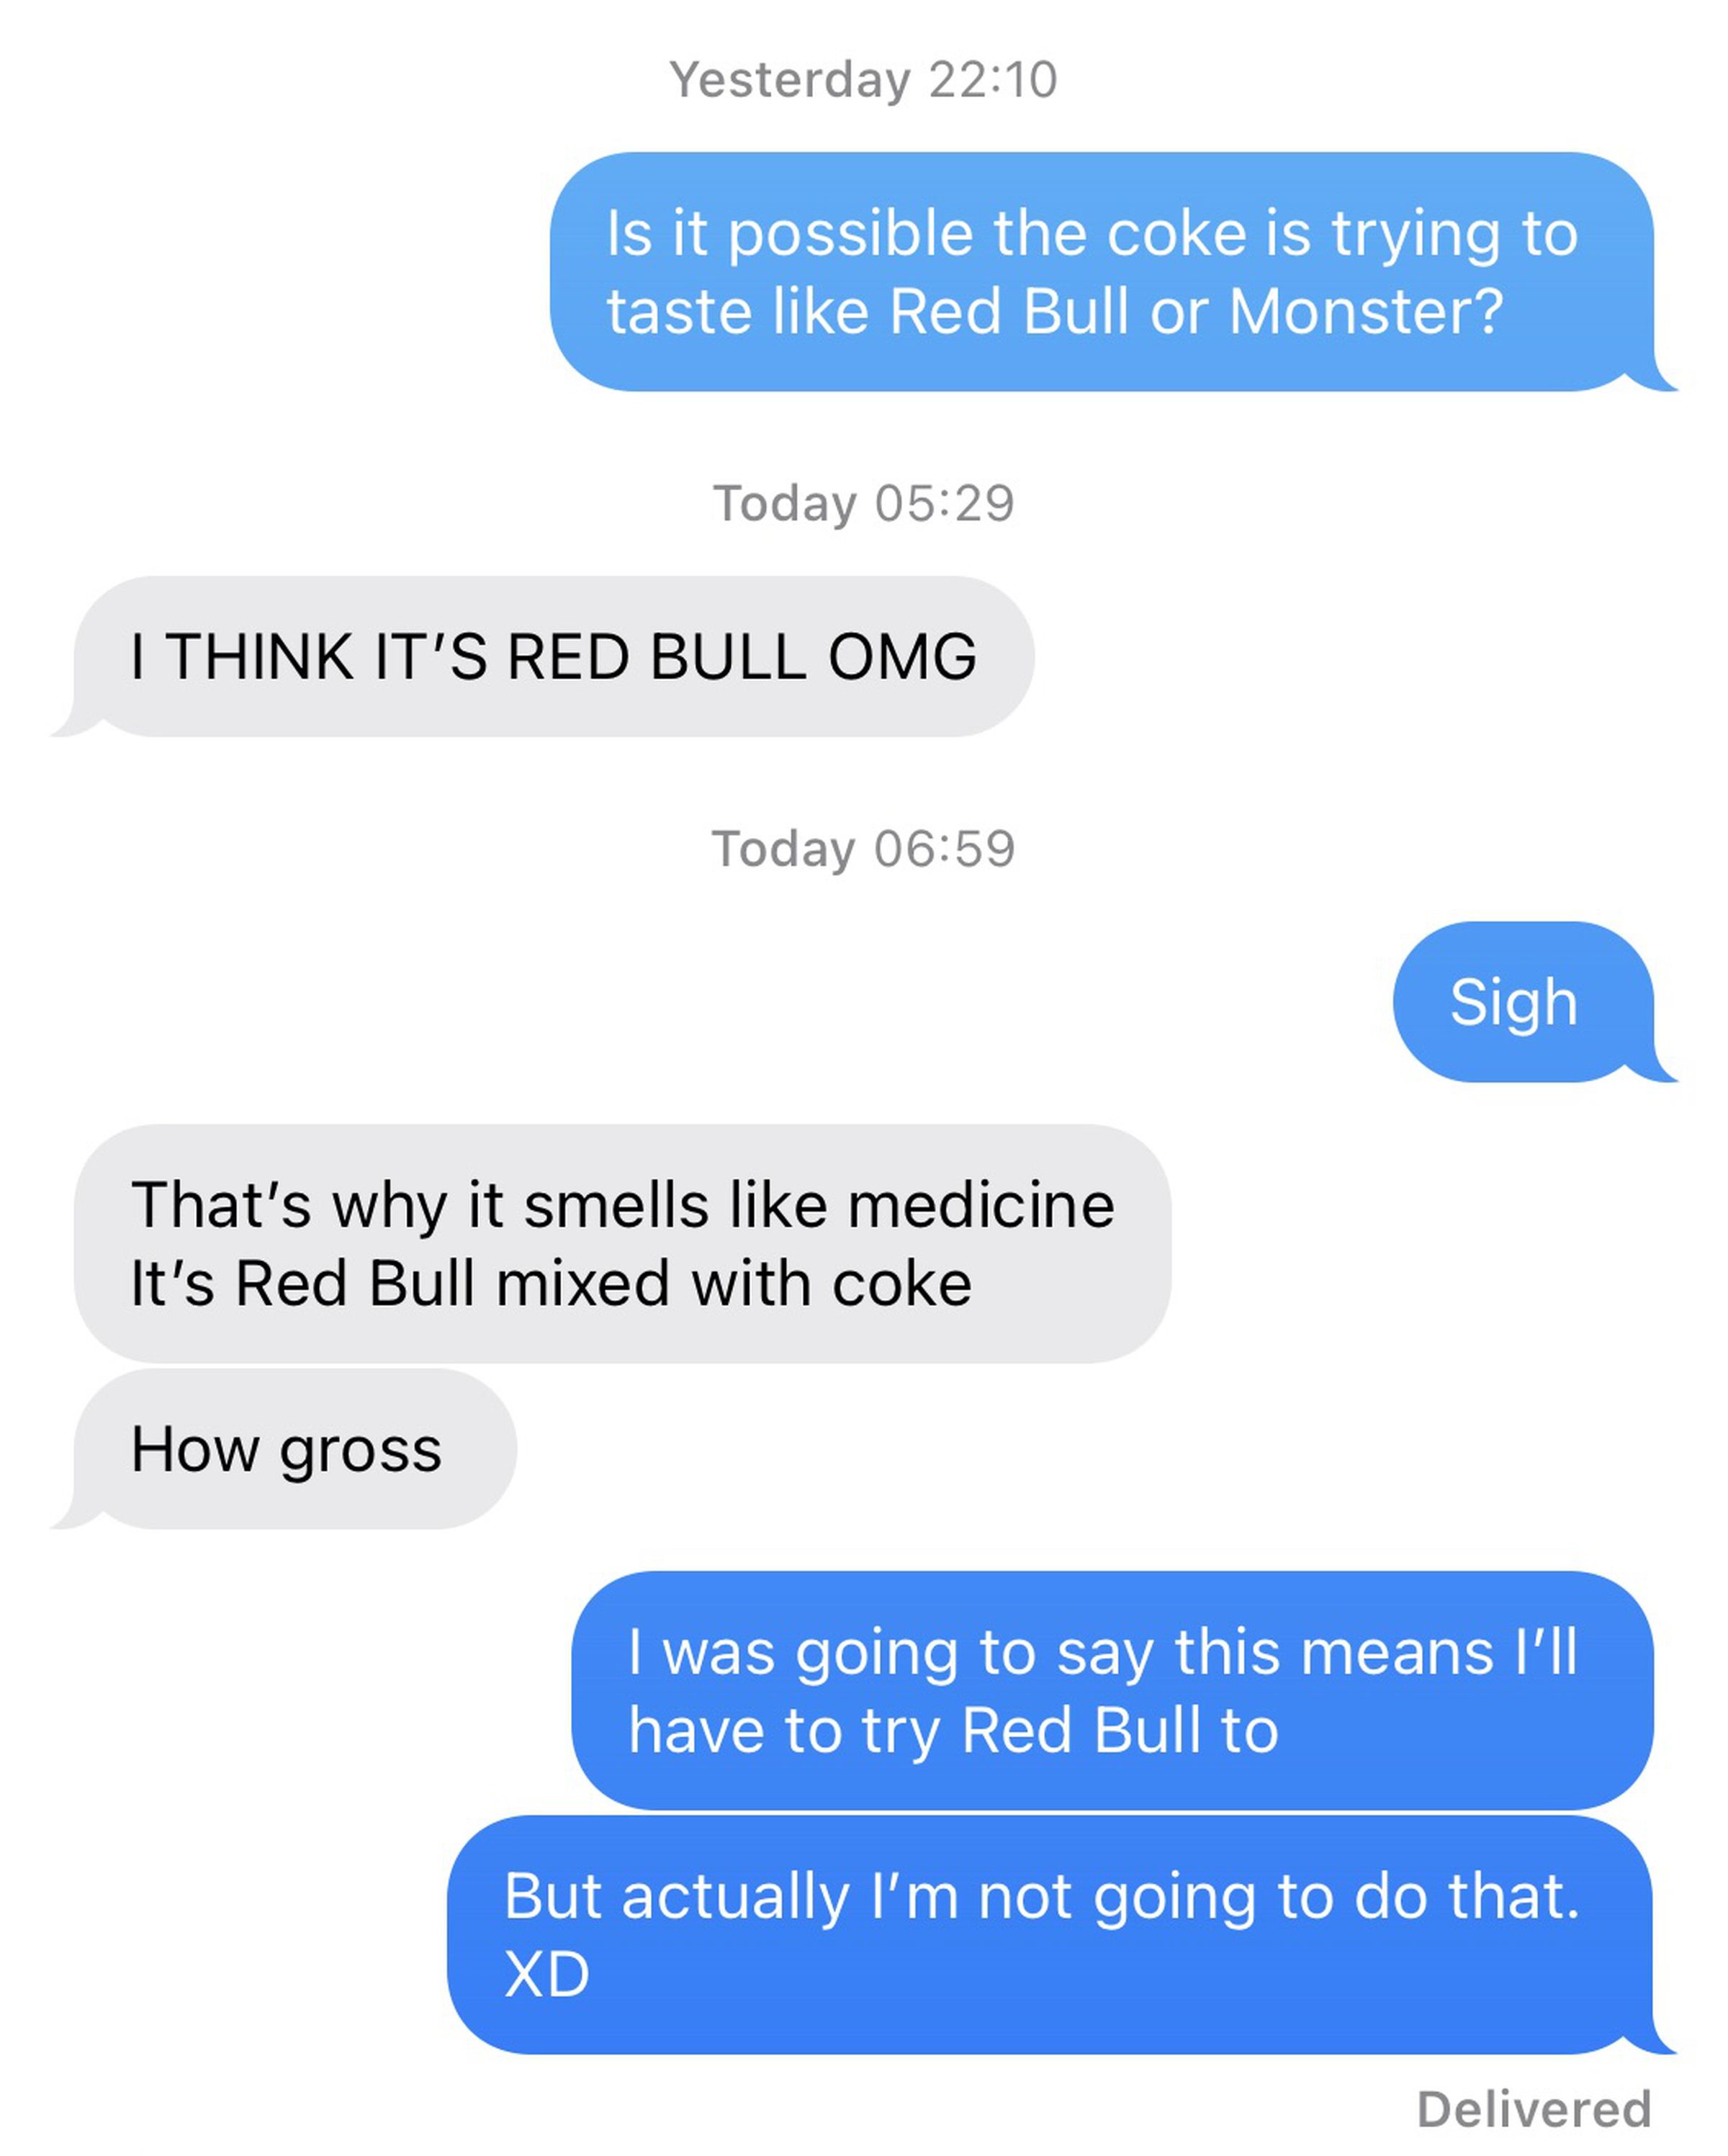 Text message conversation reading: “Is it possible the coke is trying to taste like Red Bull or Monster?” “I think it’s Red Bull OMG.” “Sigh” “That’s why it smells like medicine. It’s Red Bull mixed with coke. How gross.” “I was going to say this means I’ll have to try Red Bull too. But actually I’m not going to do that.”